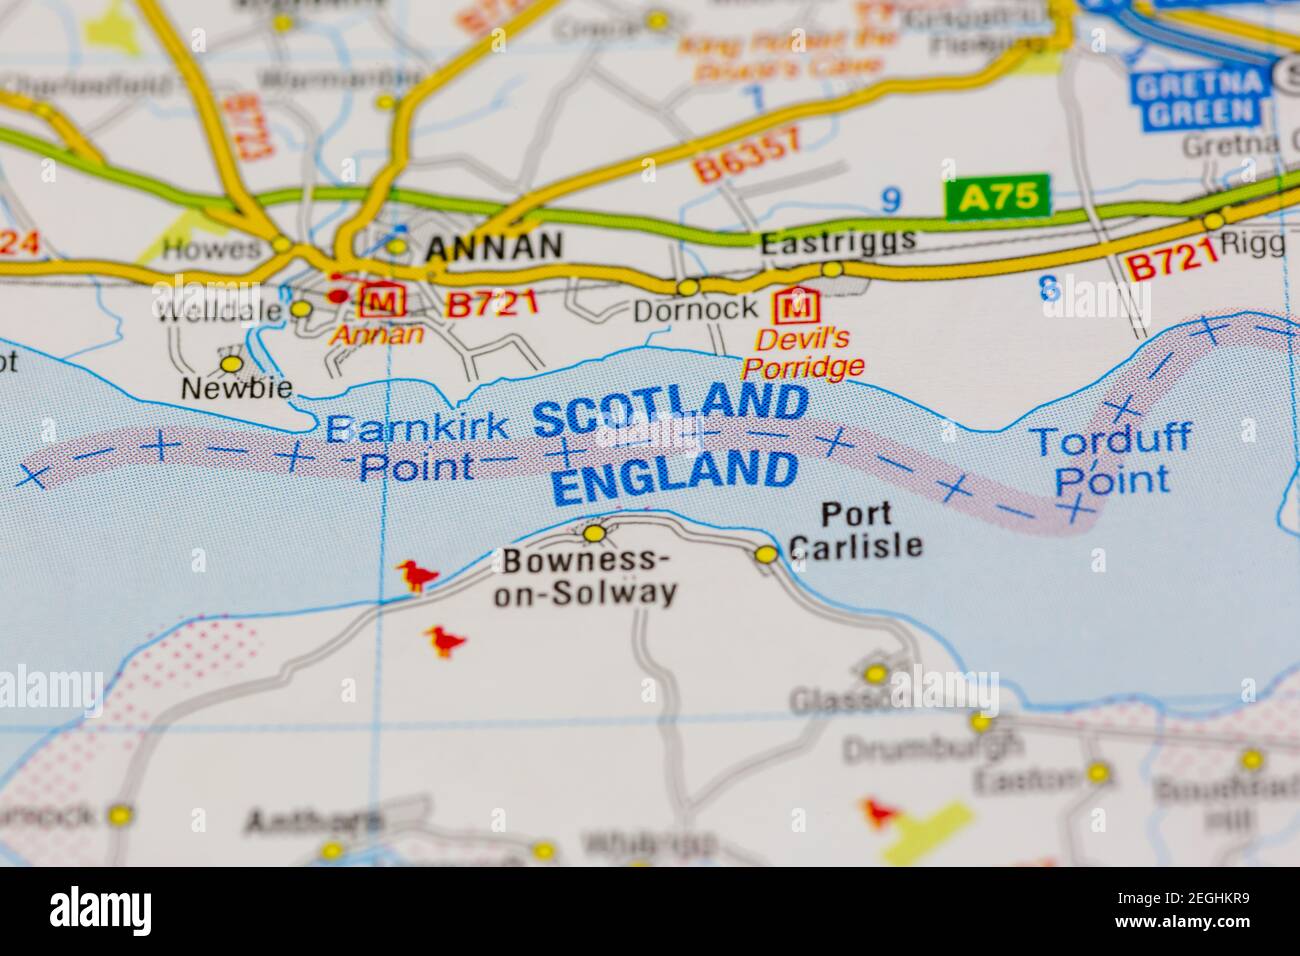 The Scotland and England Border and surrounding areas shown on a road map or geography map Stock Photo